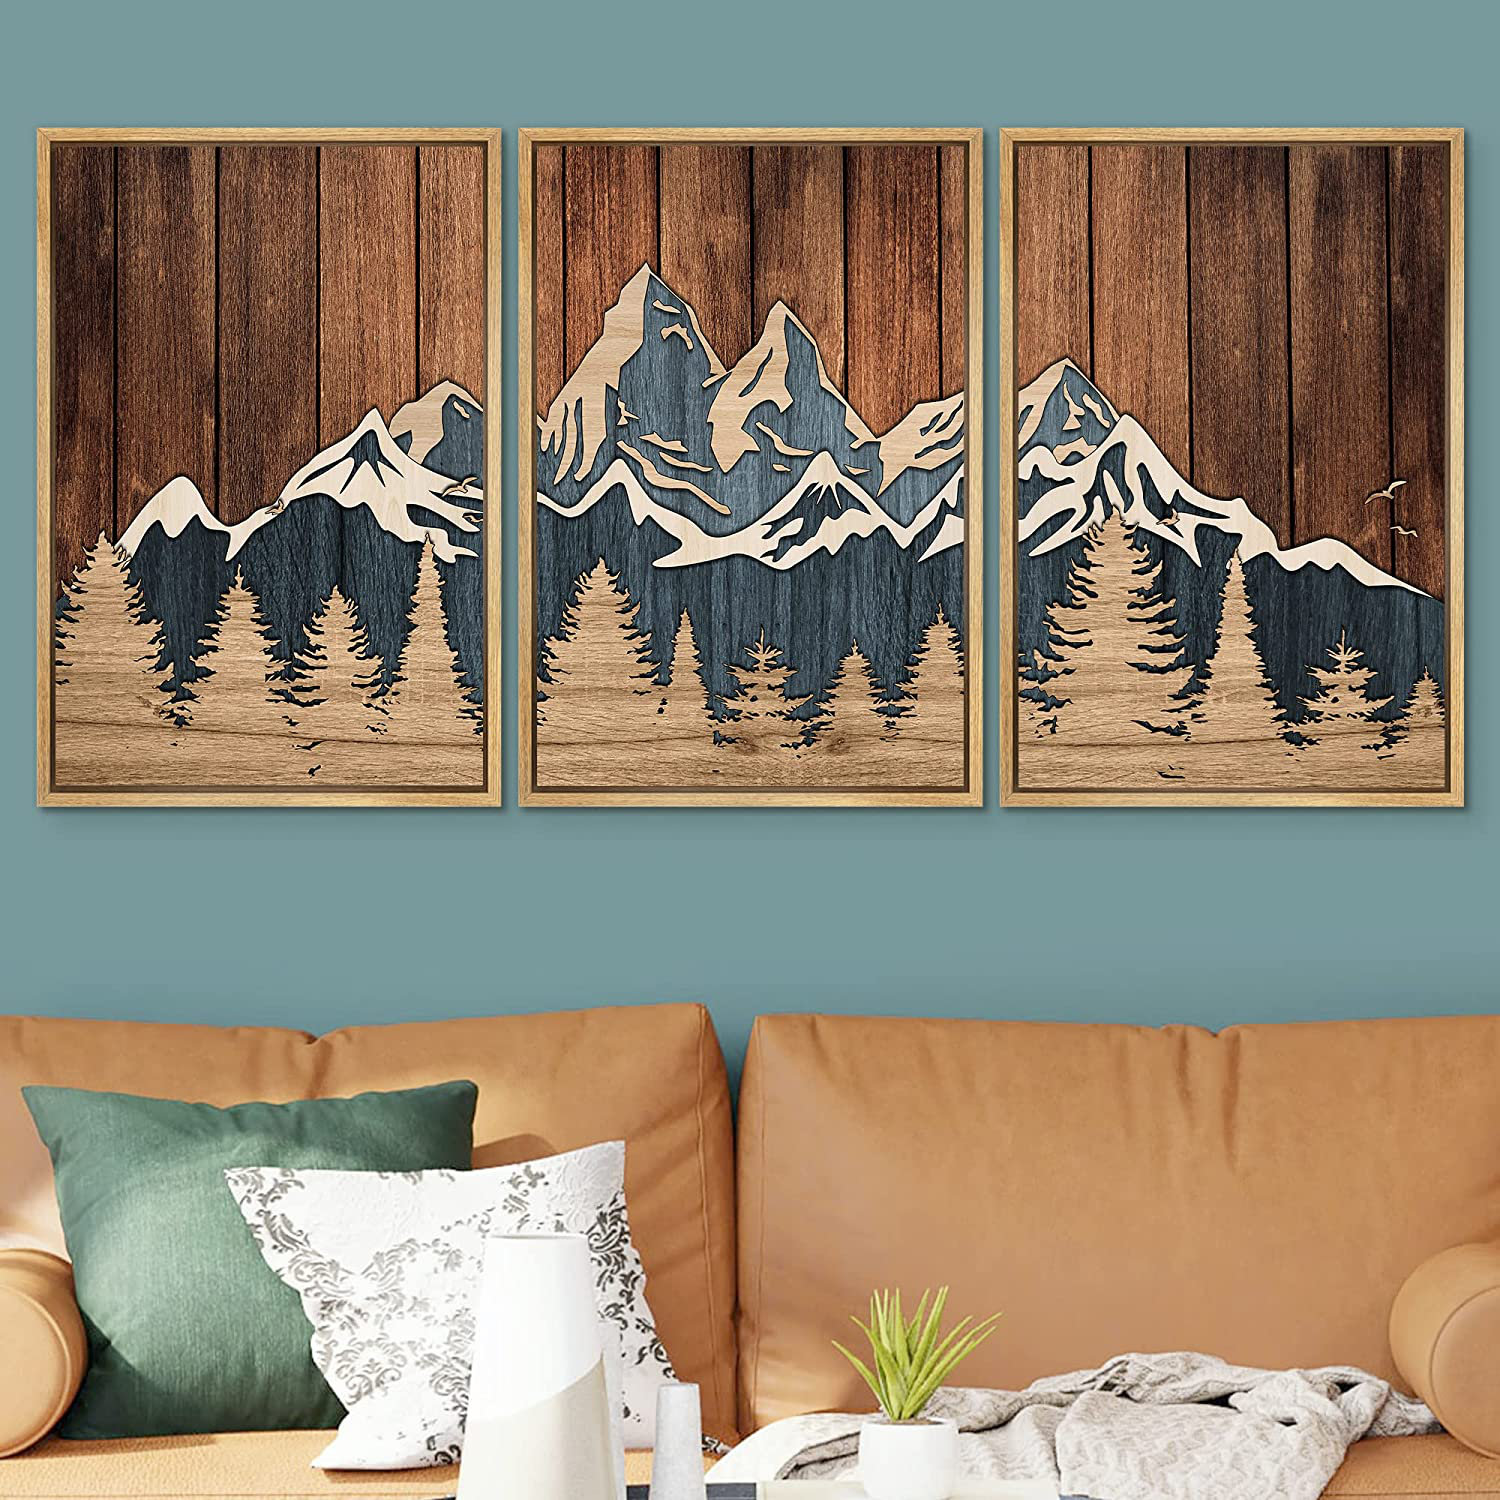 SIGNLEADER Large Canvas Wall Art Print Print Blue, White & Brown Mountain  Forest Nature Wilderness Illustrations Minimalism Rustic Landscape Colorful  For Living Room, Bedroom, Office On Canvas 5 Pieces Print